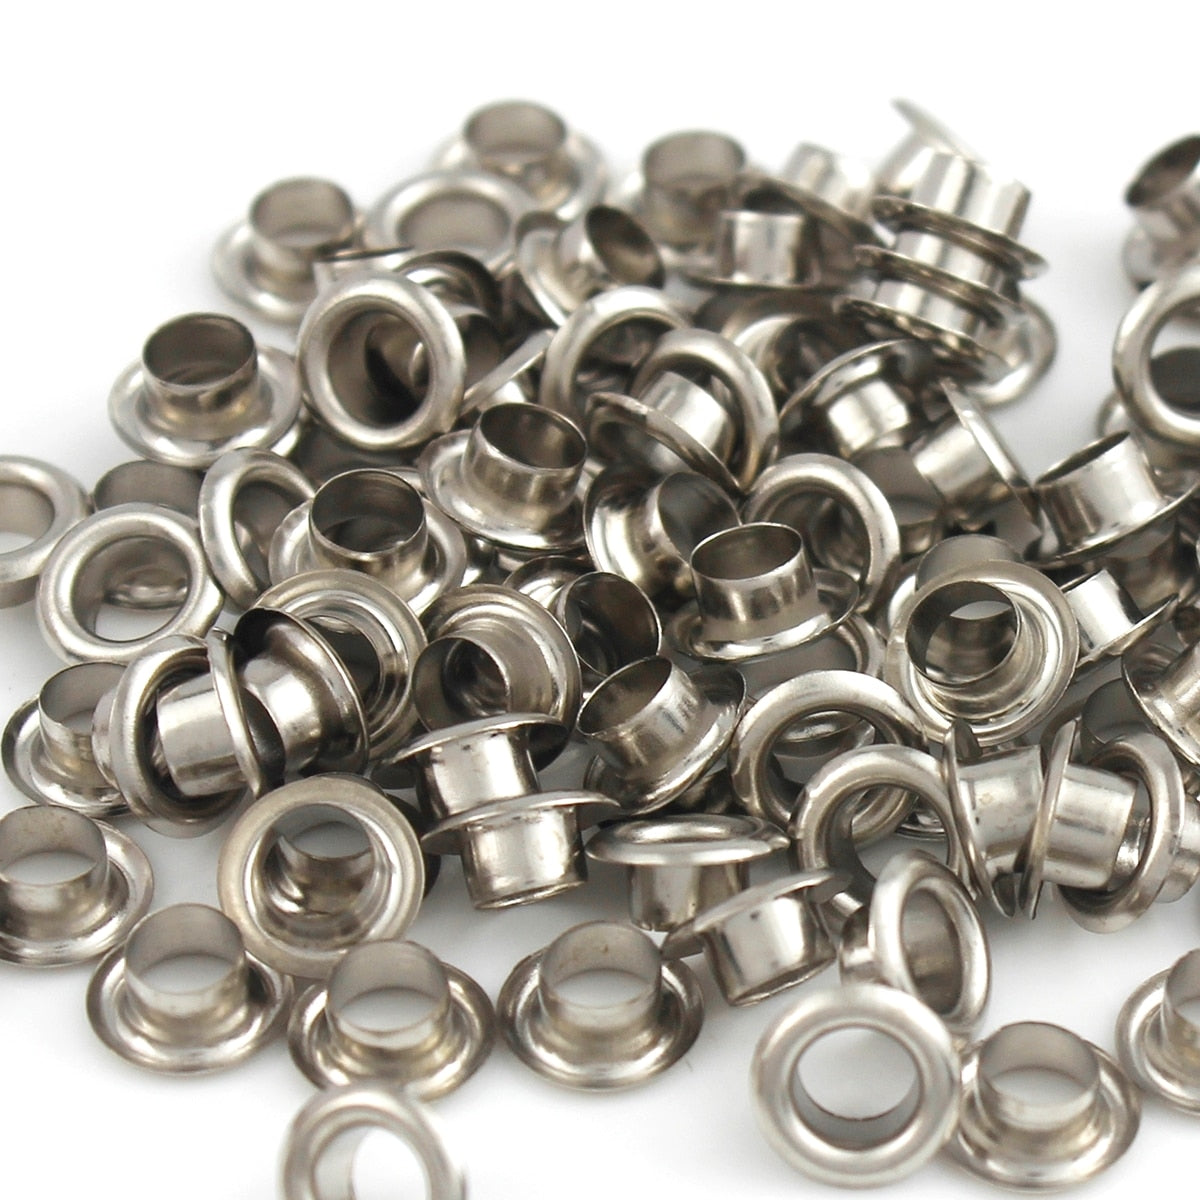 Number 3 Eyelets (in packs of 100 or 1000 pieces)